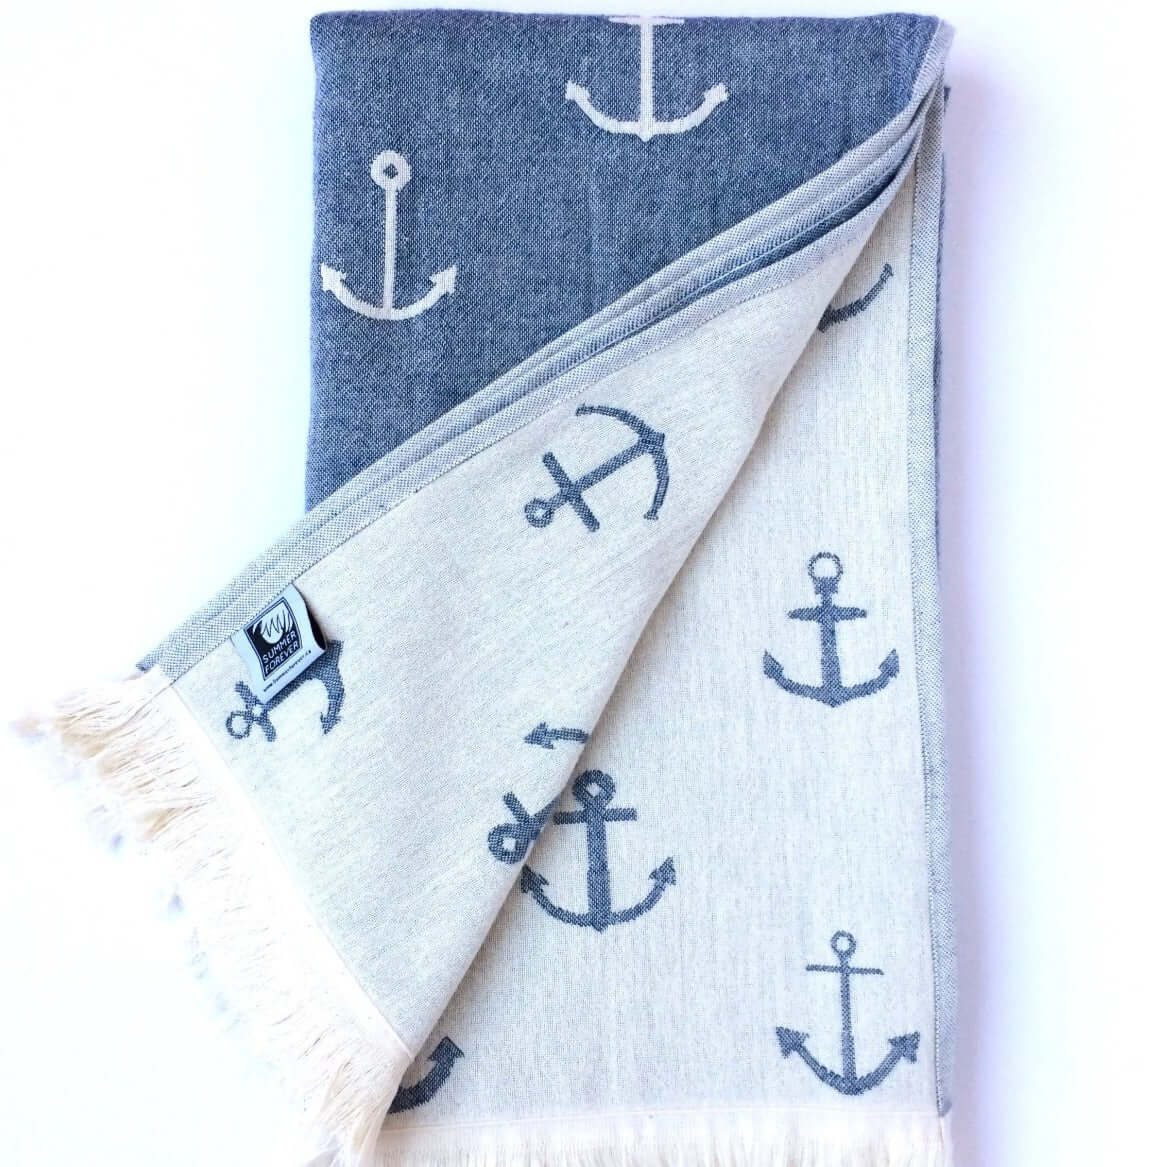 Turkish Towel, Anchor Designs, Navy, Reversible, for Travel Beach Bath Pool, absorbent, durable 